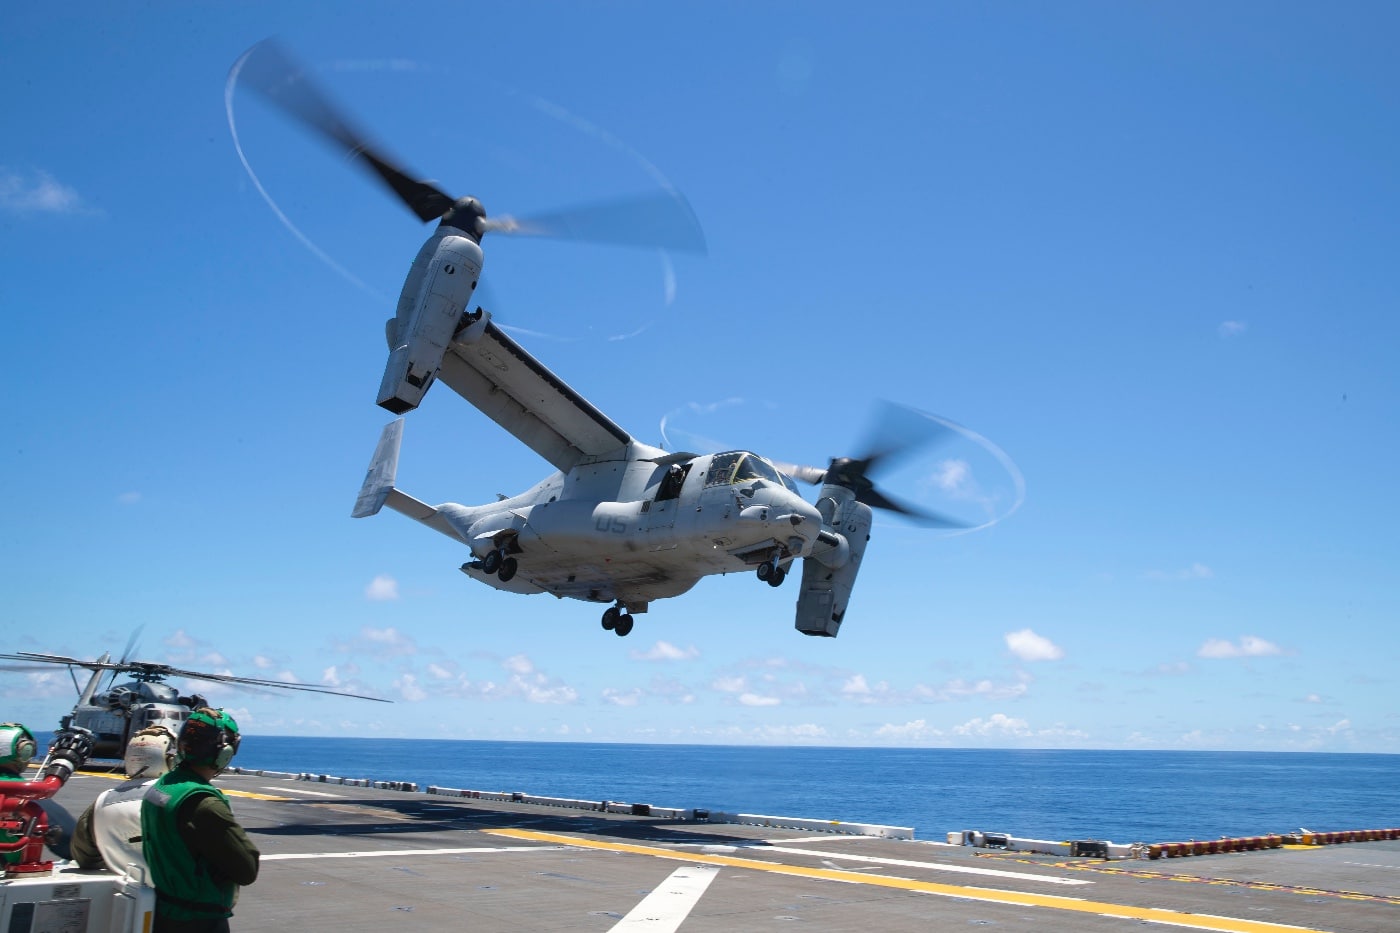 mv-22 osprey tiltrotor aircraft with marines takes off from uss tripoli